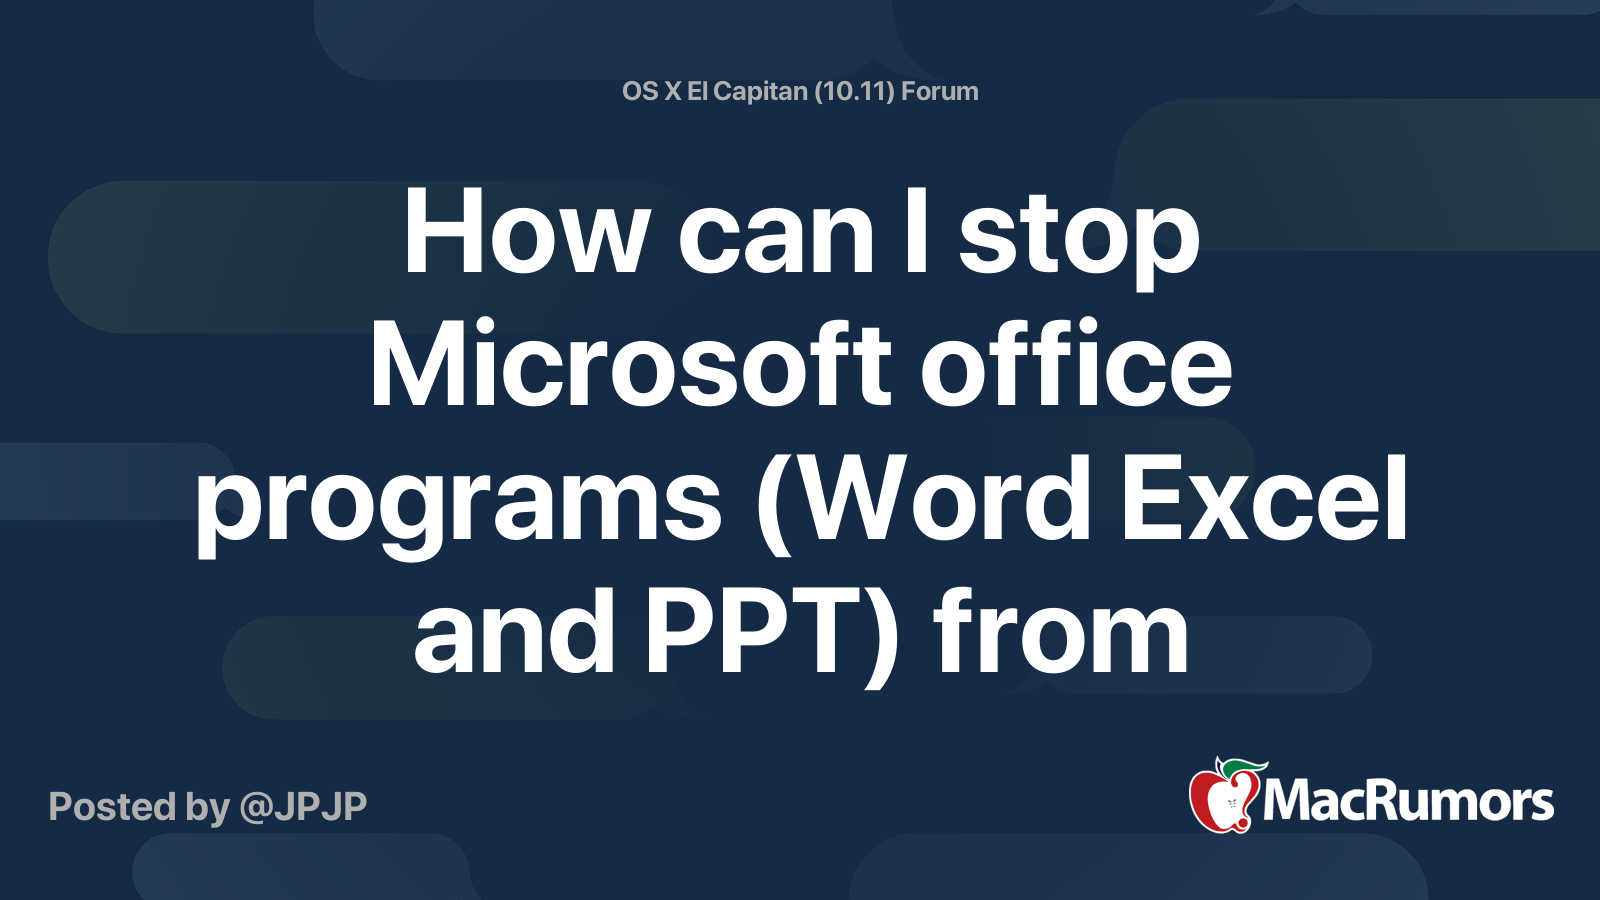 How can I stop Microsoft office programs (Word Excel and PPT) from  launching on startup of my mac? | MacRumors Forums